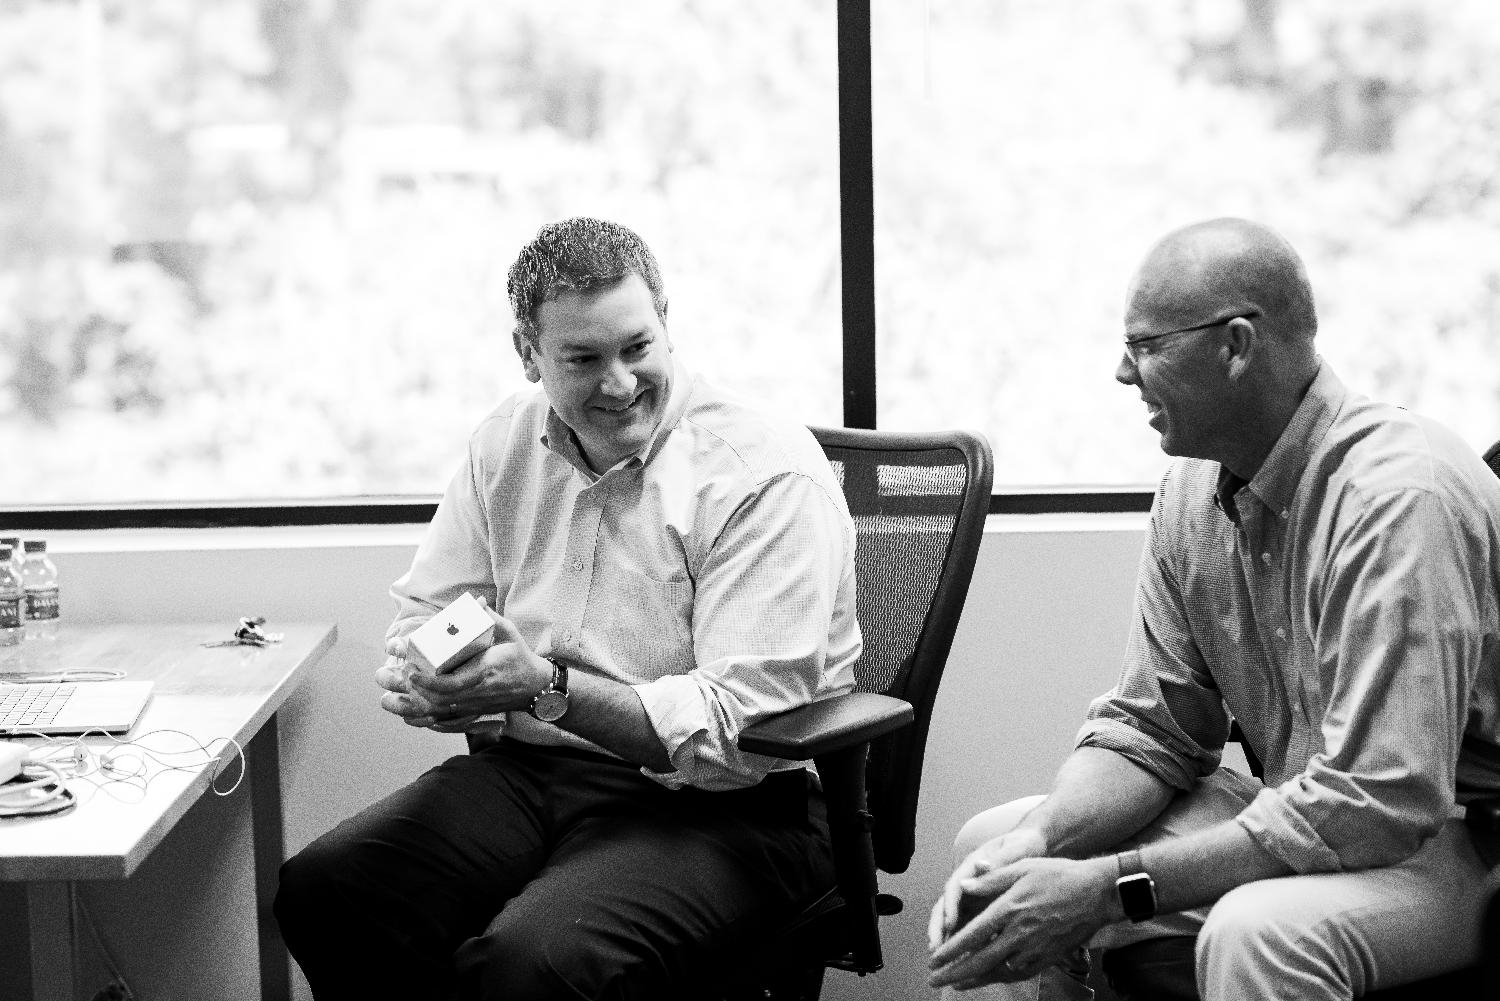 Working hard and sharing a laugh during a brainstorming session.